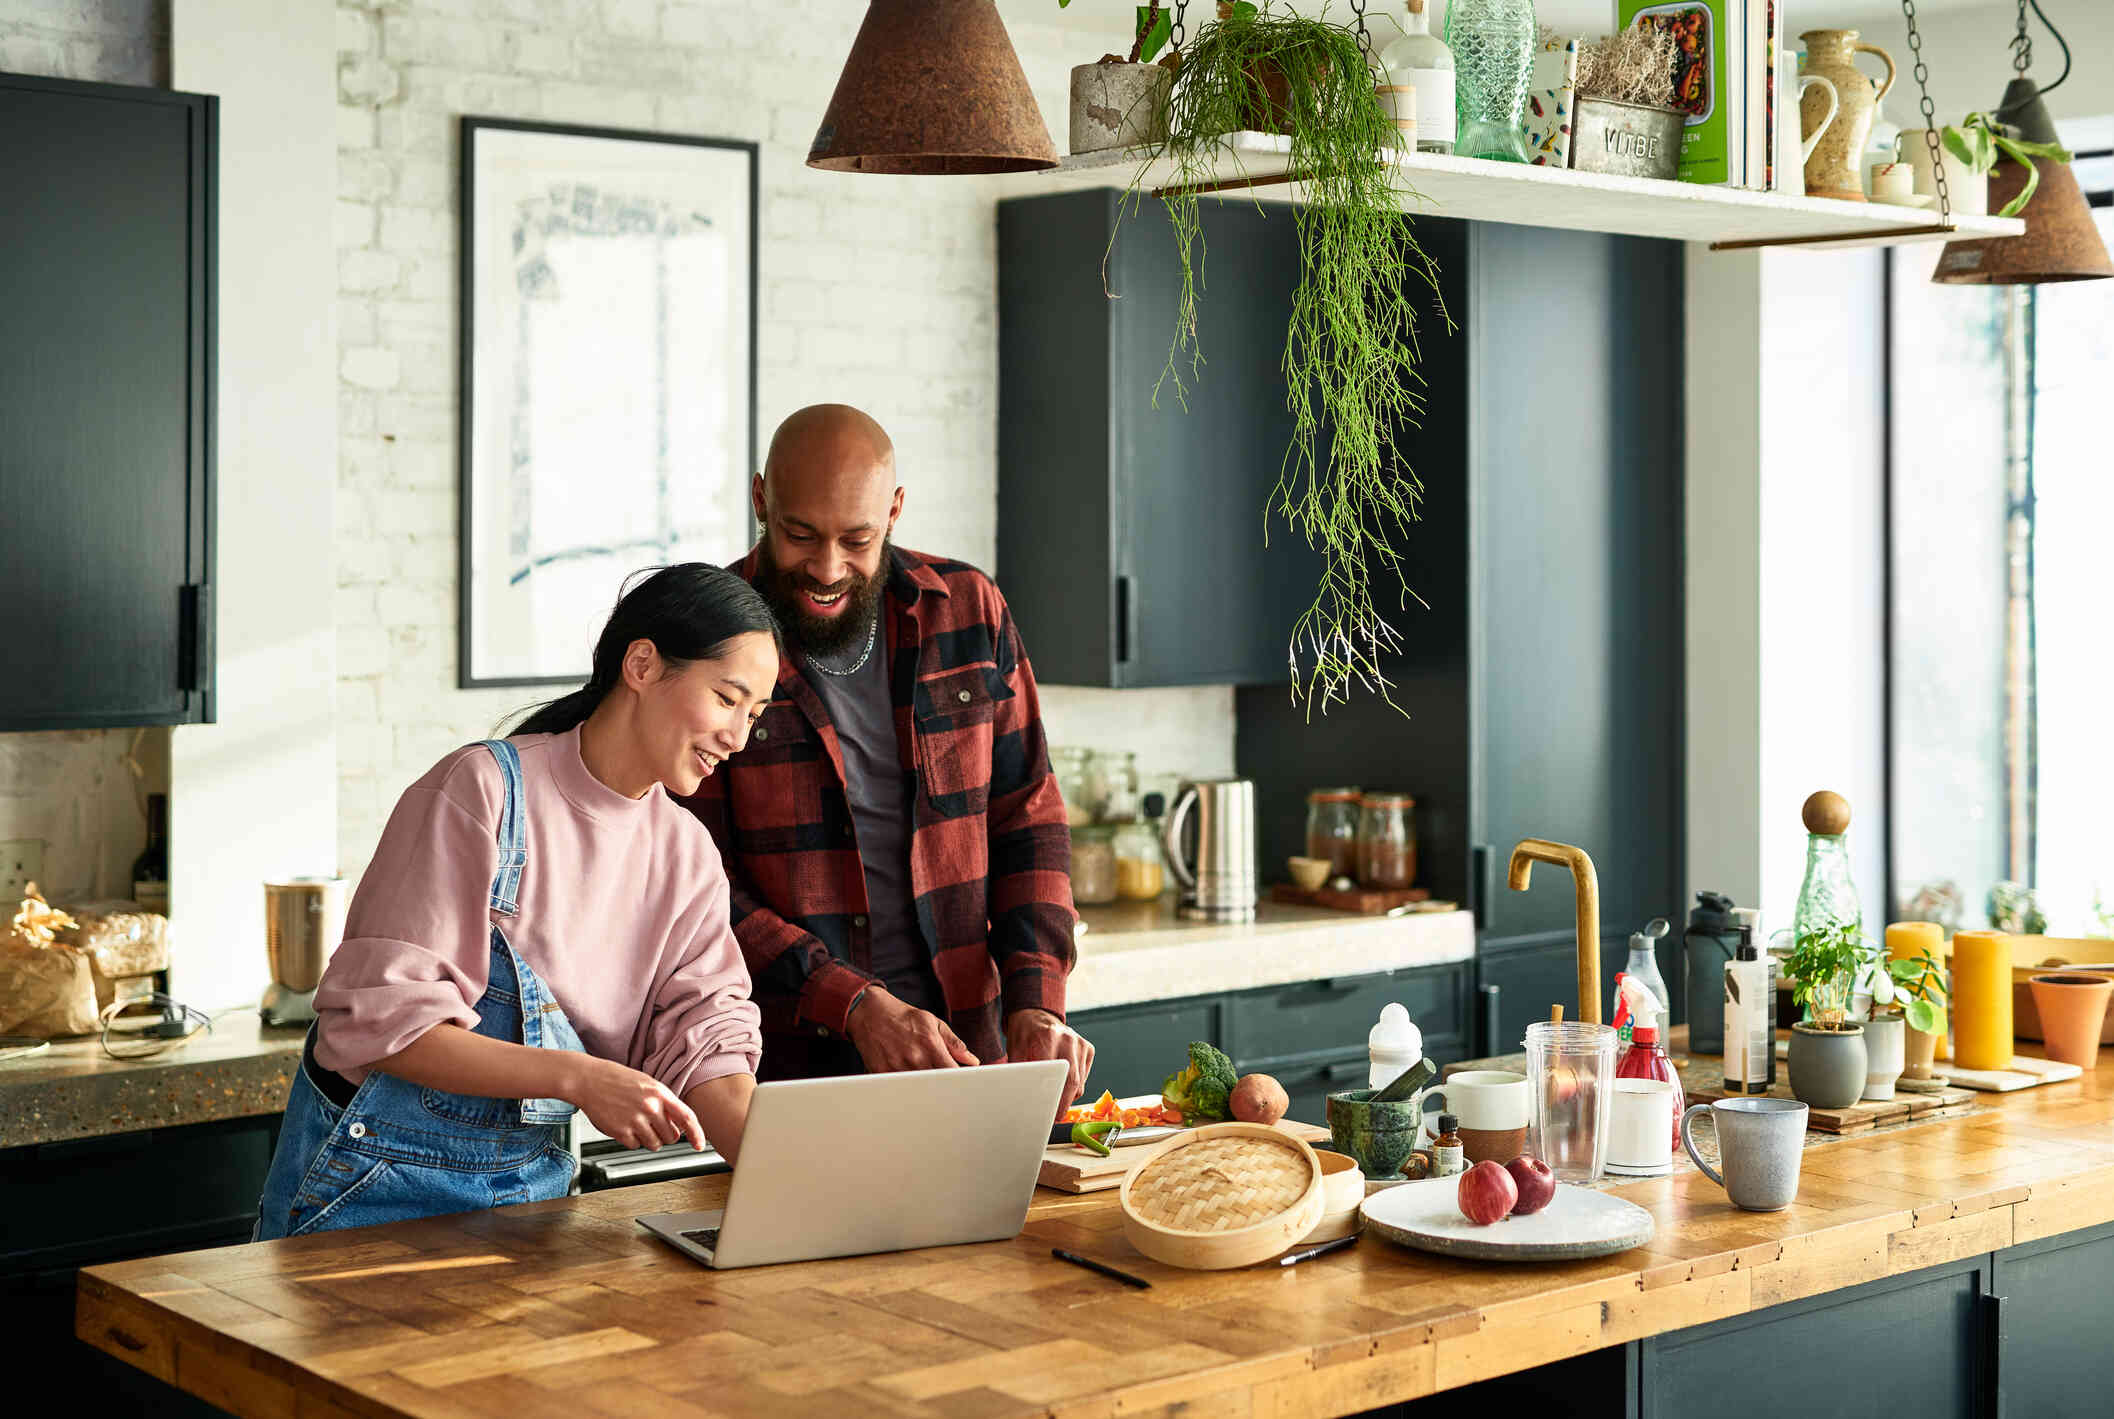 A male and female  couple stand in the kitchen and cook together while looking at the recipe on the laptop infront of them with a smile.